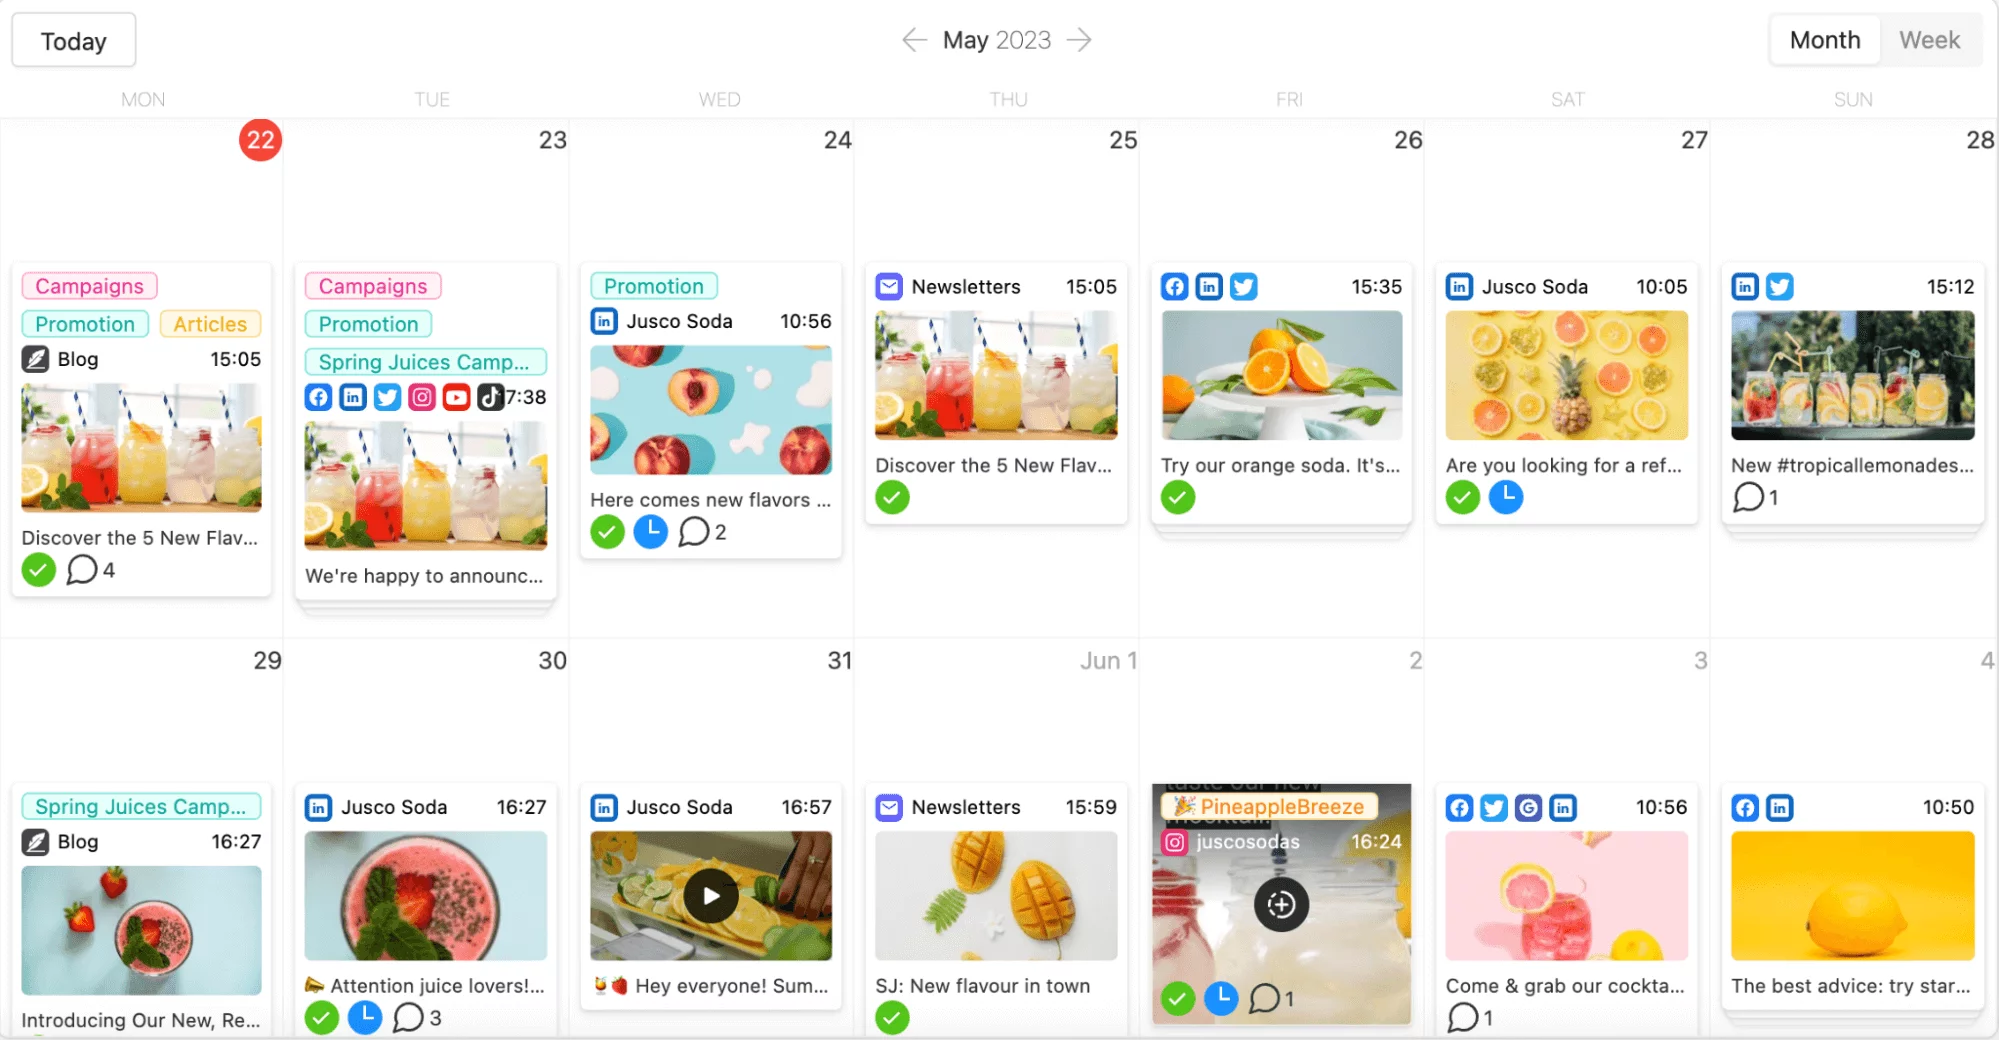 social media posts scheduled across multiple platforms arranged in calendar view by days